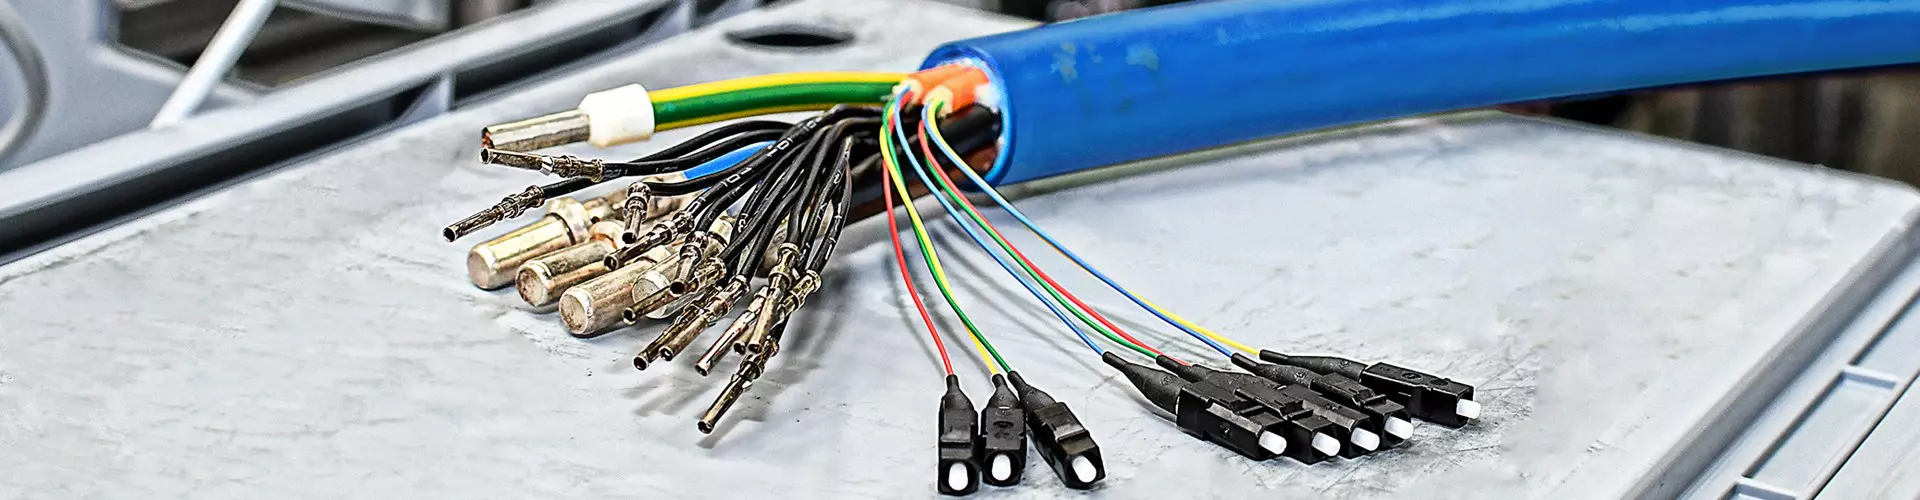 Hybrid cables